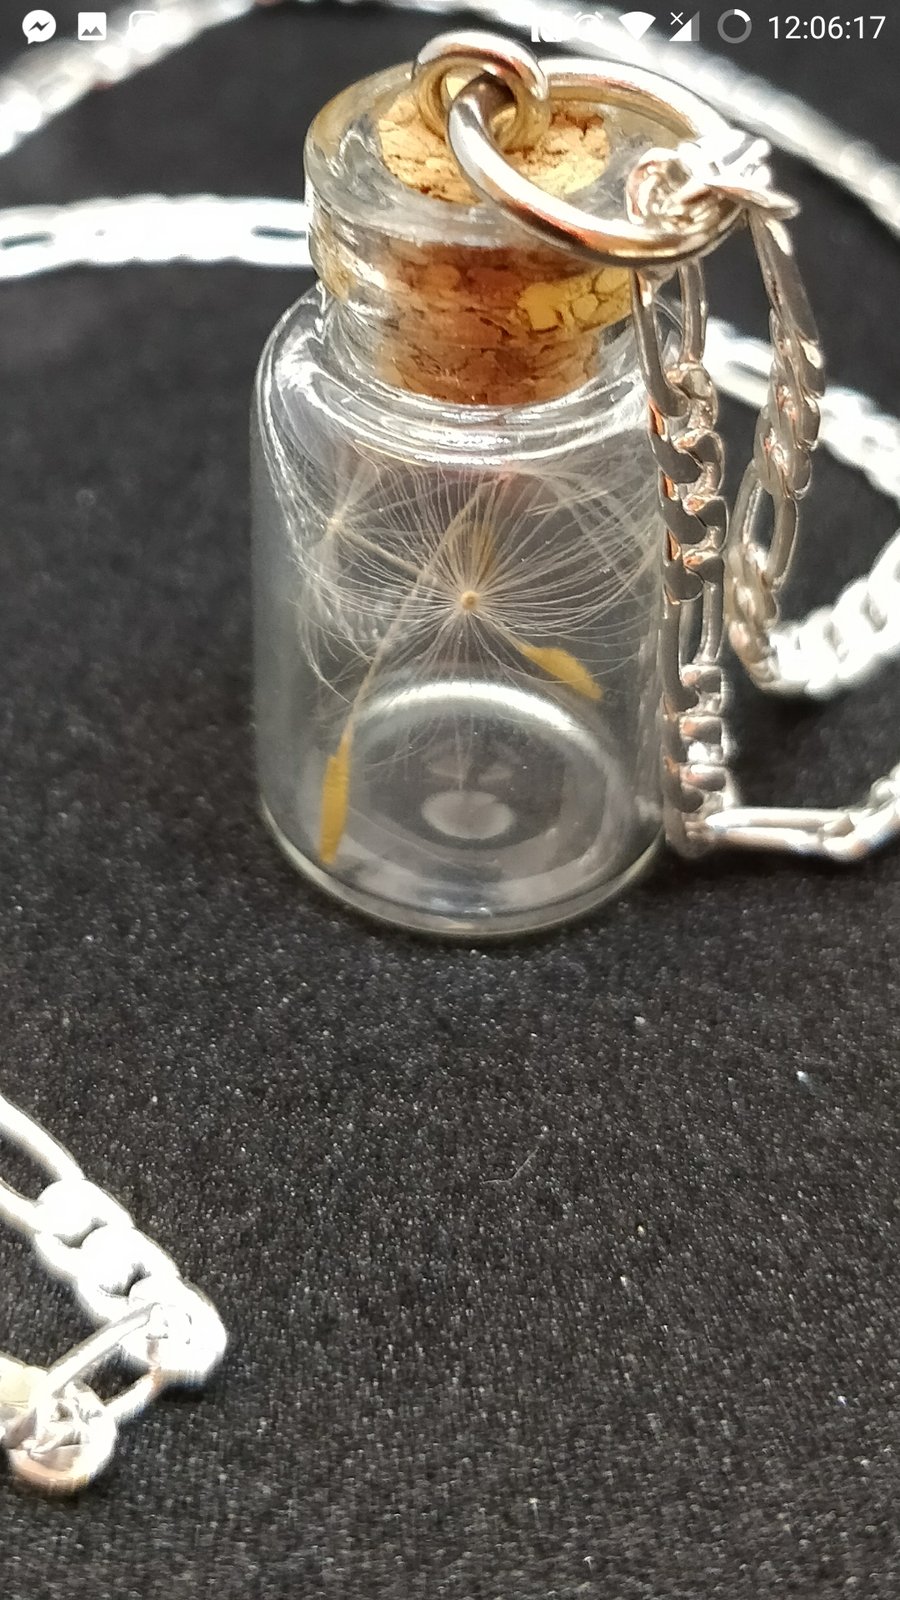 Three wishes sealed in tiny glass bottle sterling silver necklace